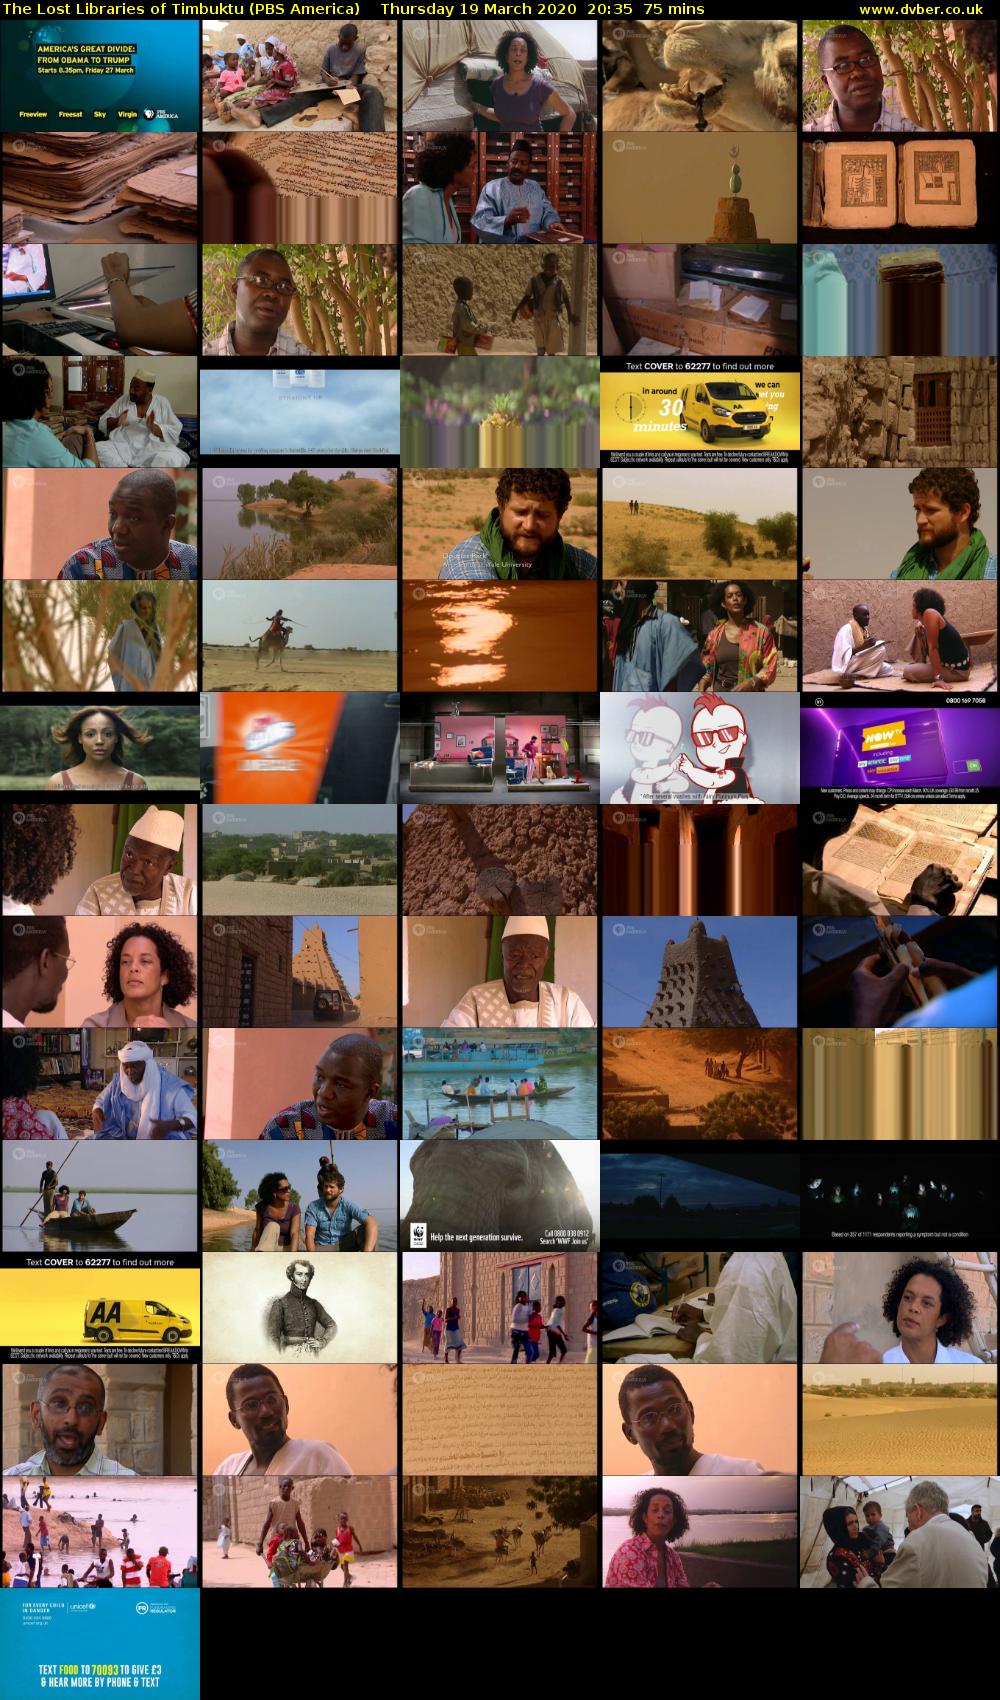 The Lost Libraries of Timbuktu (PBS America) Thursday 19 March 2020 20:35 - 21:50